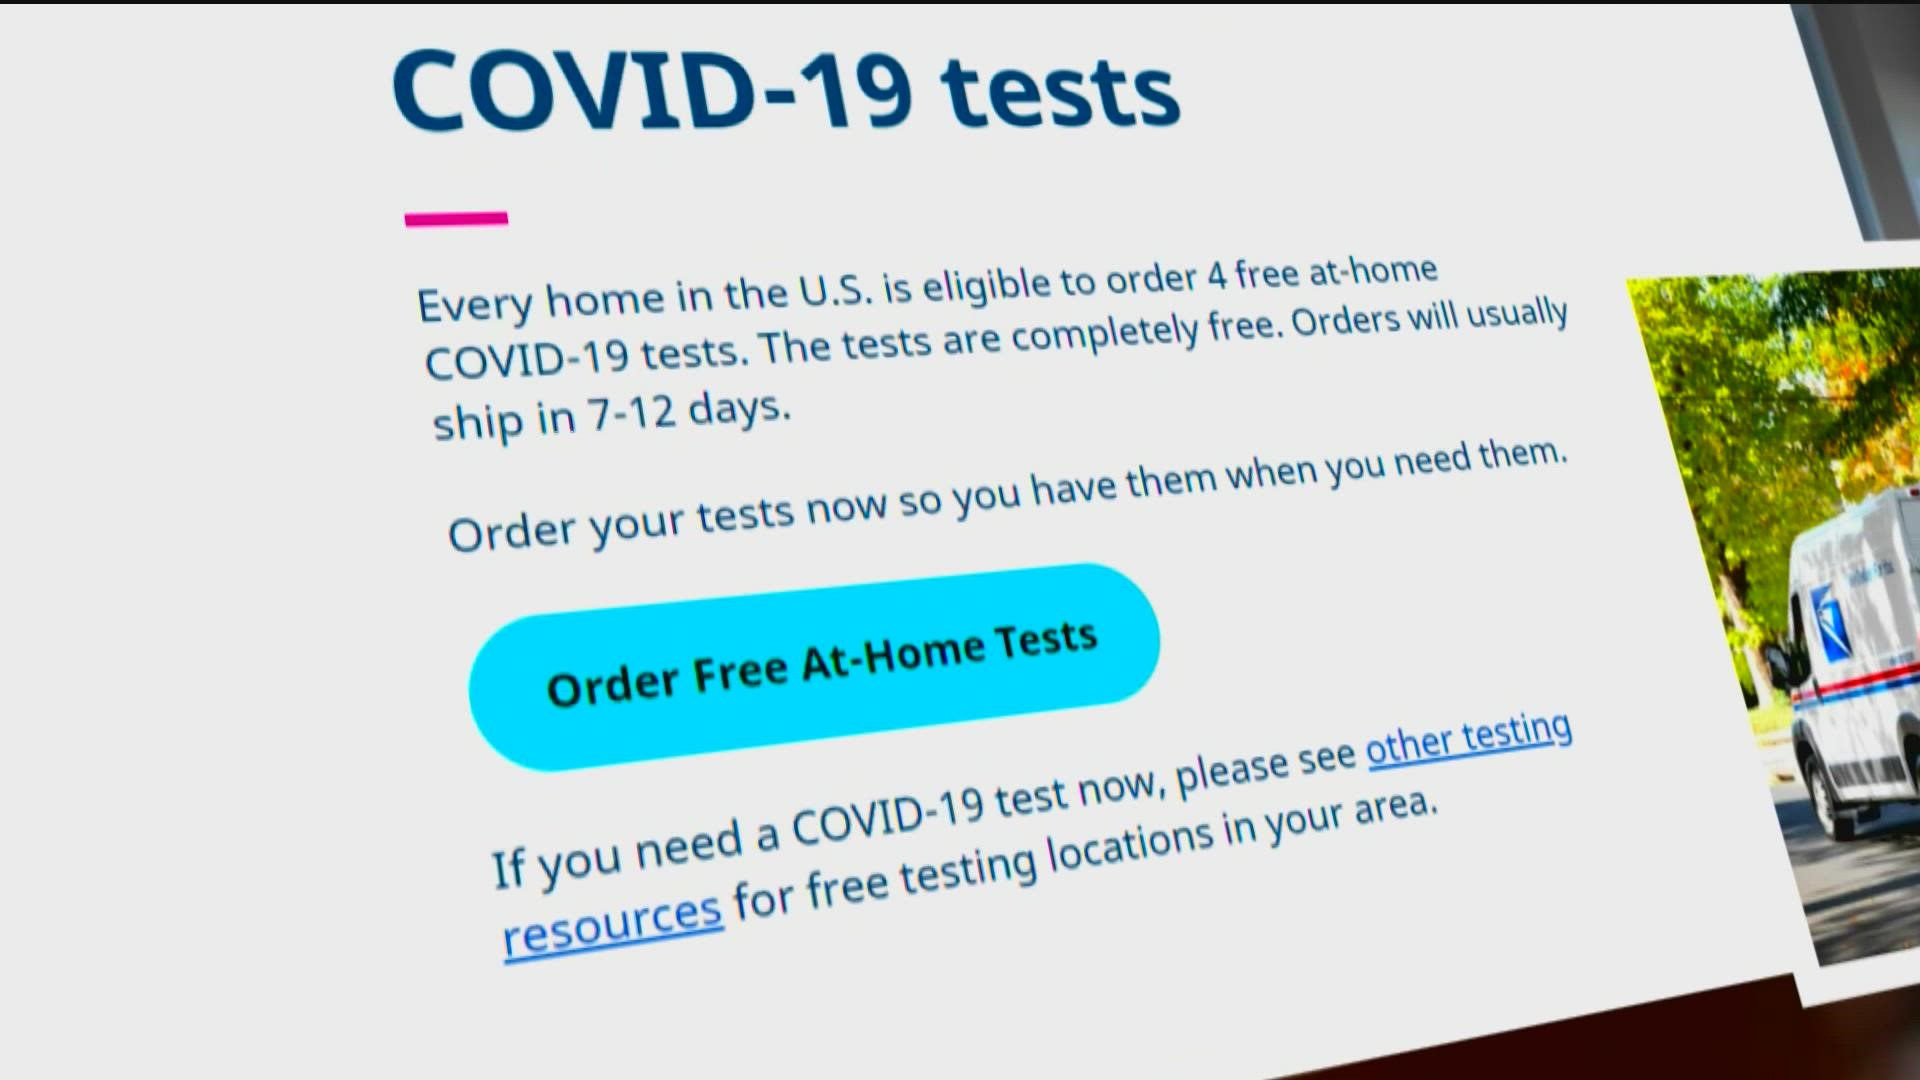 The White House assured that "we have tests for every residential address in the U.S.  Please check back tomorrow if you run into any unexpected issues."